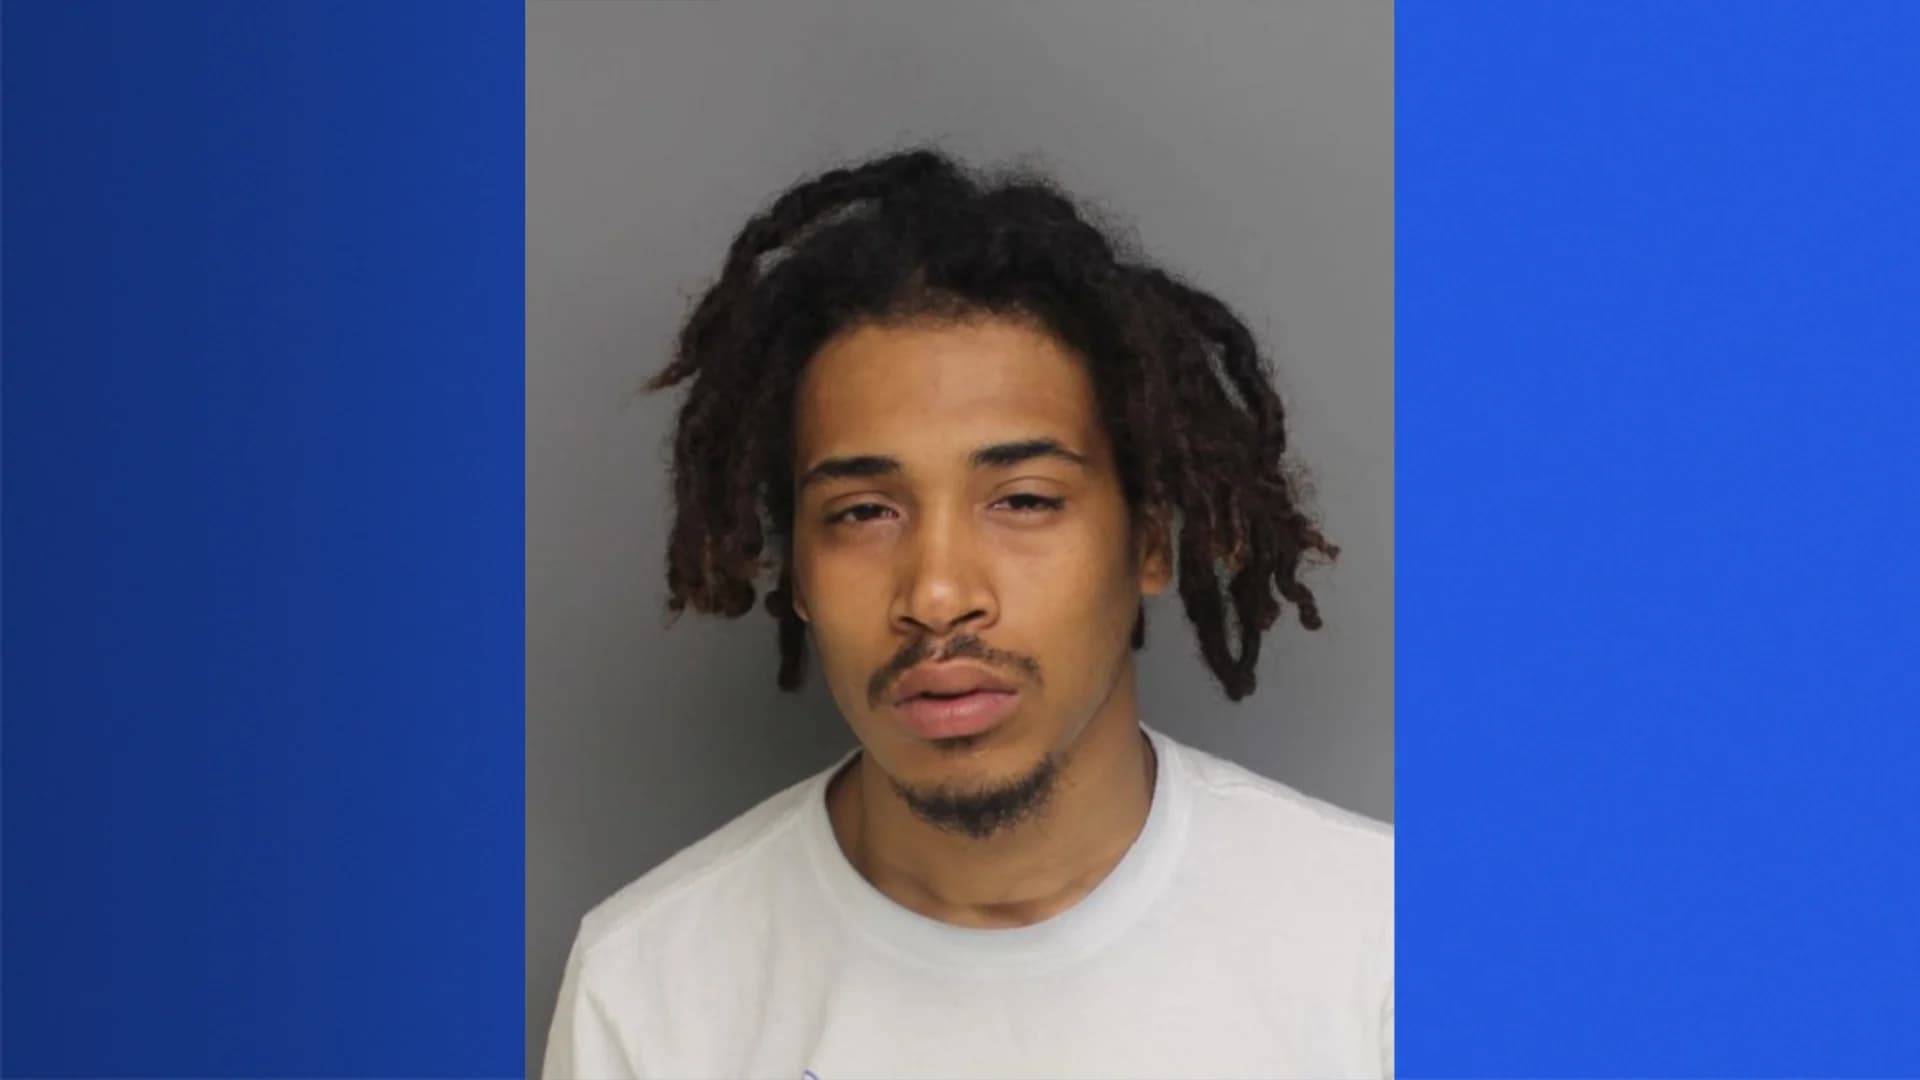 Suspect charged in fatal shooting into first-floor window of Bridgeport home